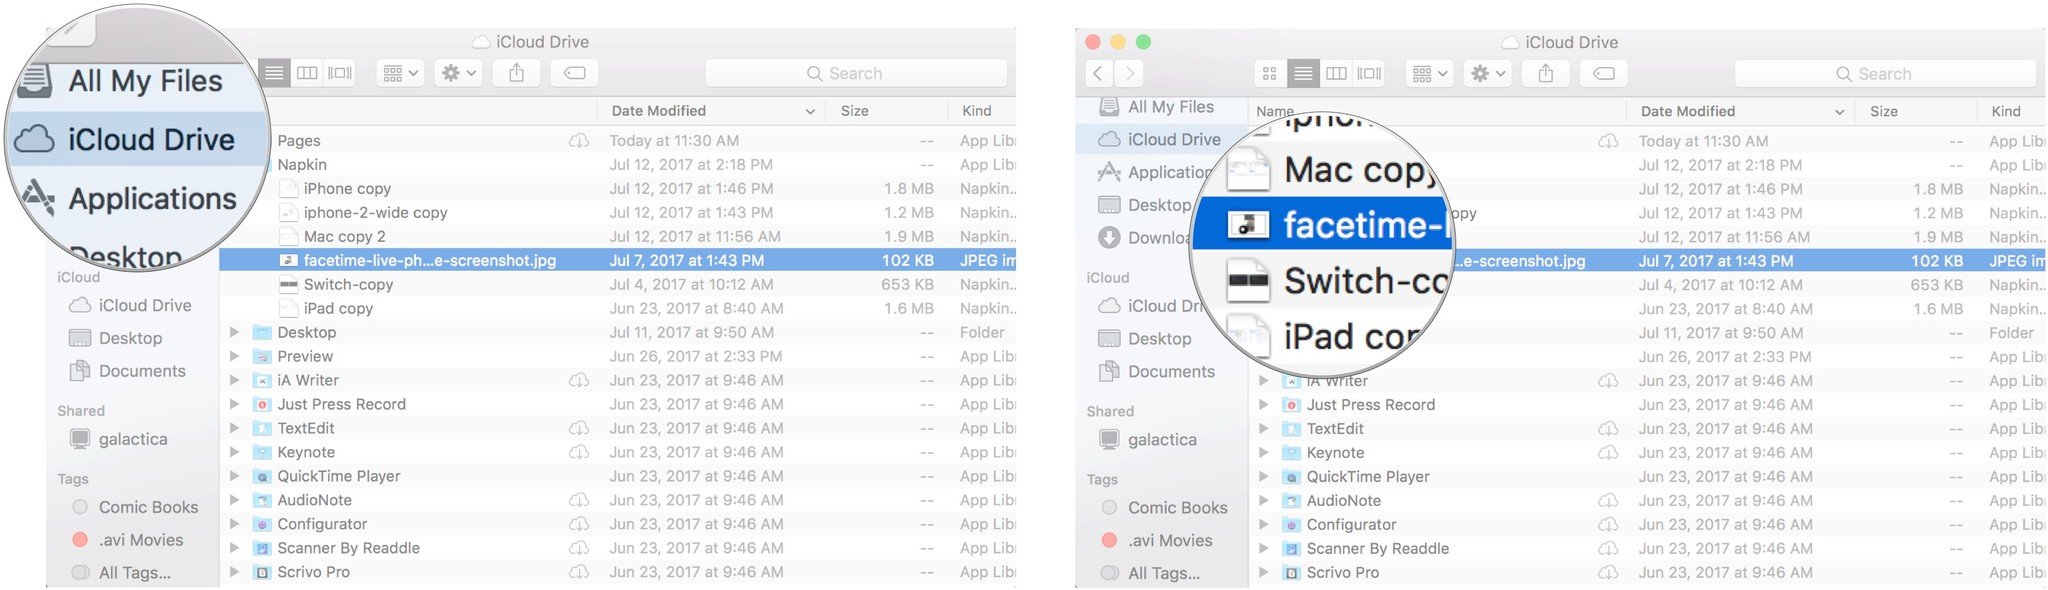 Click on iCloud Drive, then select a folder, then right click on a file